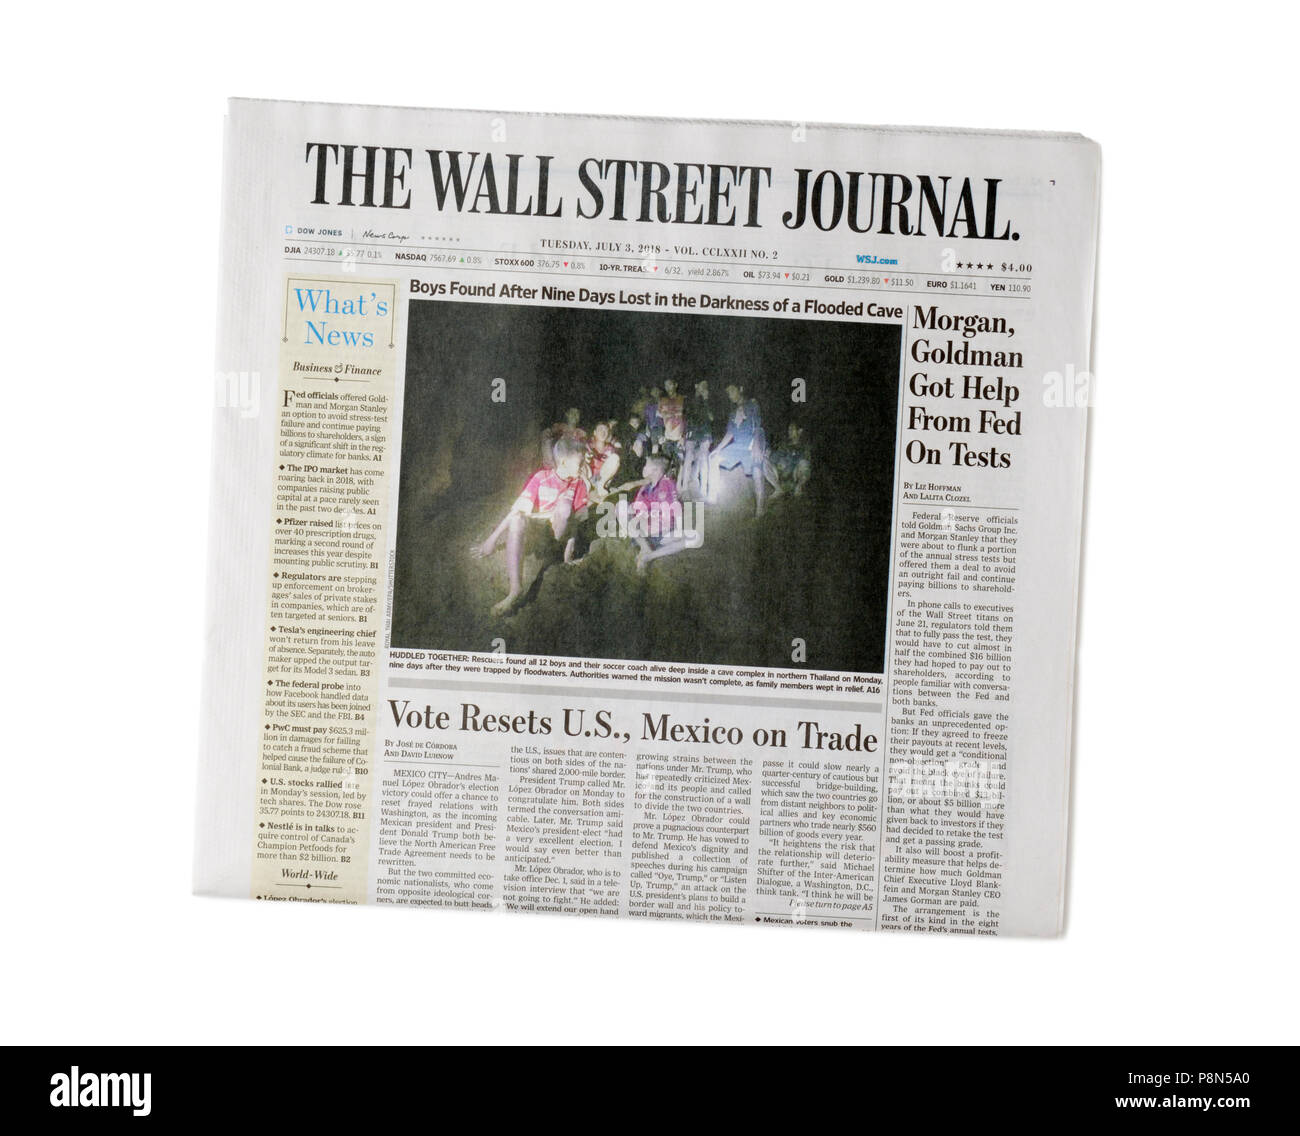 Giornale, Wall Street Journal, front page, edizione a stampa Foto Stock